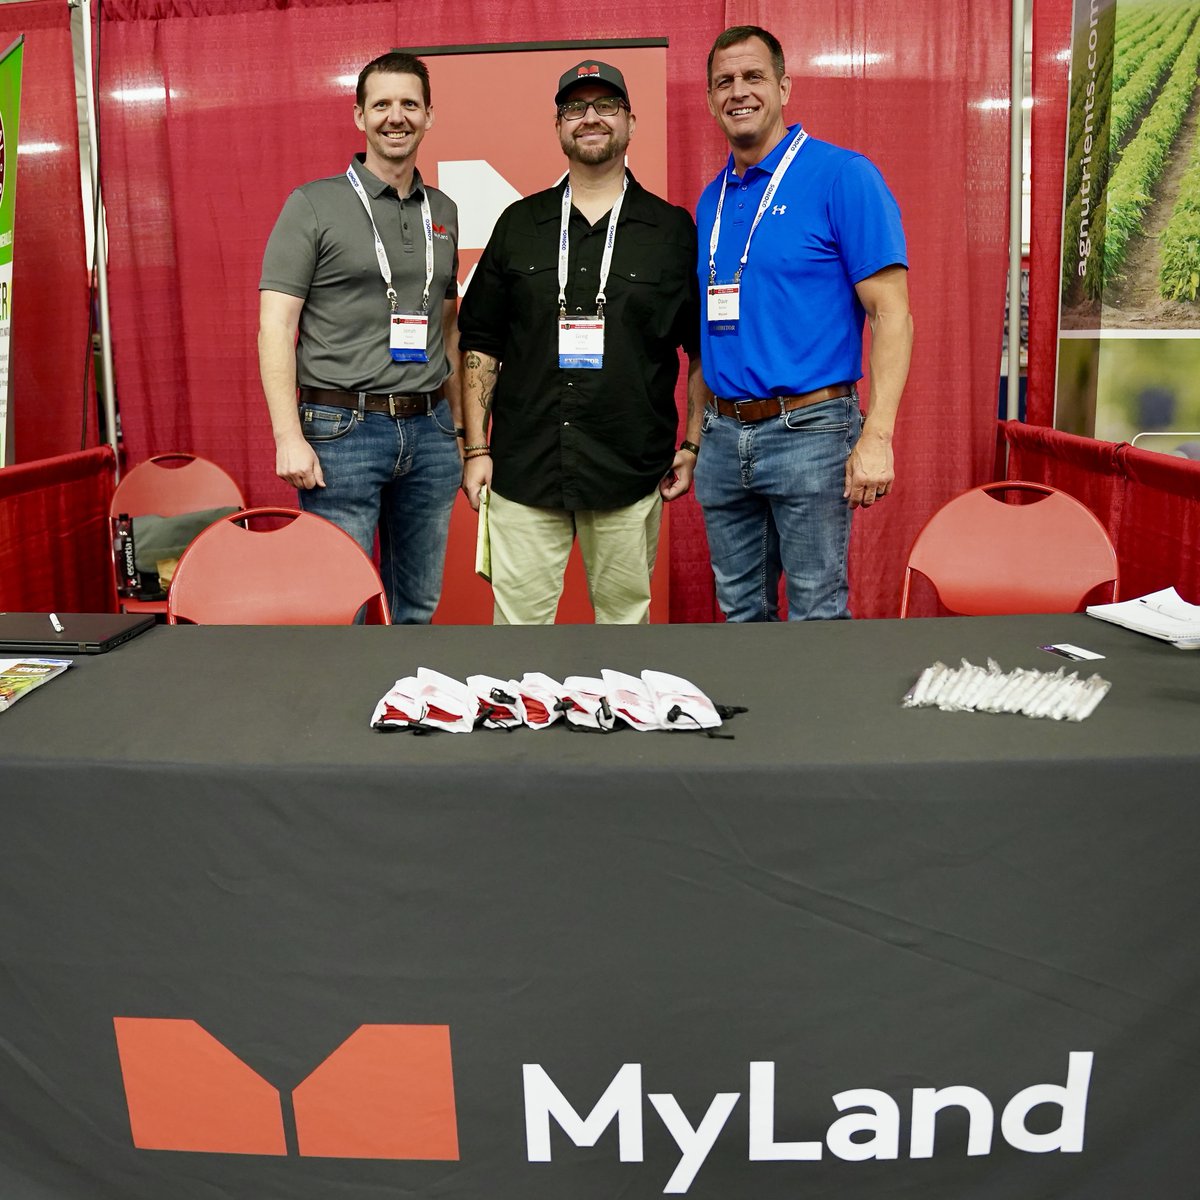 The MyLand team had a wonderful time connecting with strawberry growers at the 42nd Annual AgriTech event in Florida! Thank you to @FlaStrawberries for bringing together the FL strawberry industry for a great event. 

#StrawberryGrowers #FloridaStrawberries